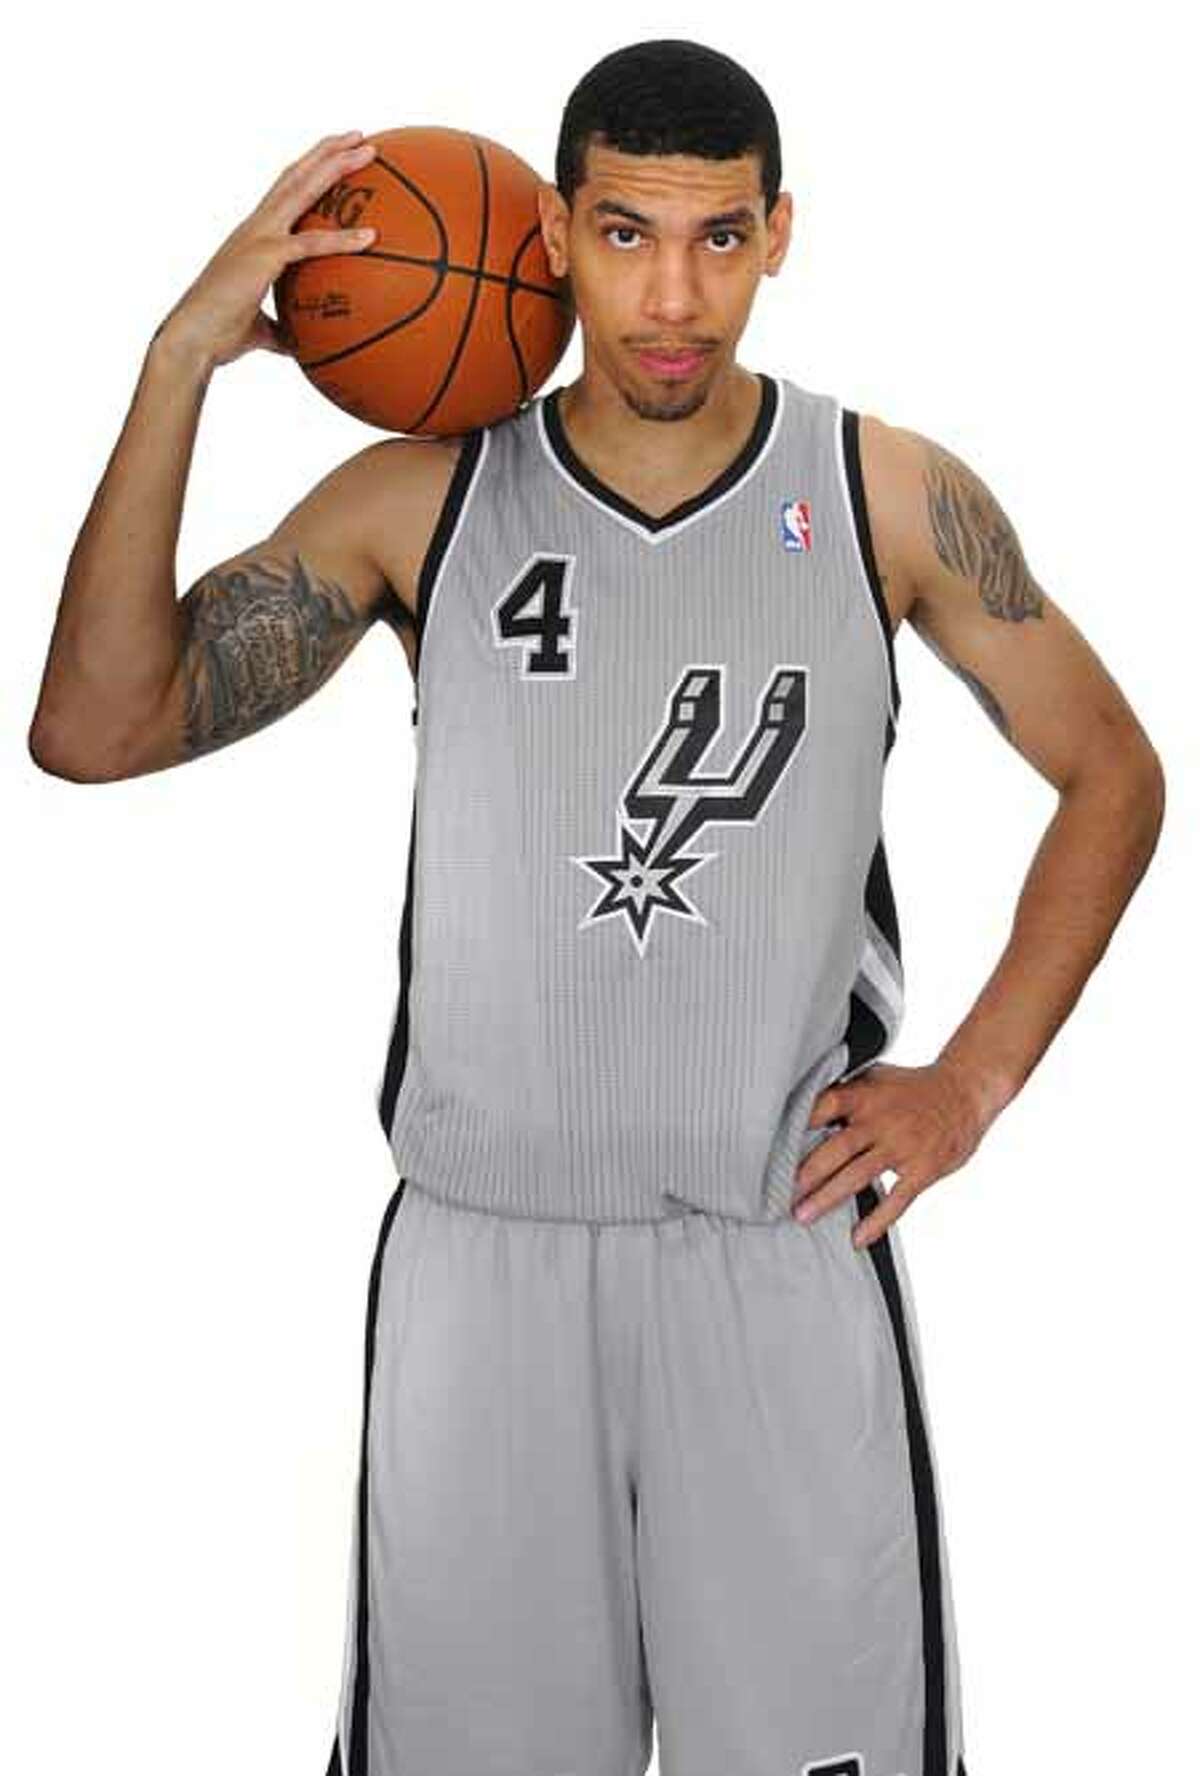 The San Antonio Spurs unveiled today a new alternate jersey that will be worn during the upcoming 2012-13 NBA season. Danny Green is shown wearing the uniform. The fresh look silver jerseys with black trim feature the Spurs iconic secondary logo prominently on the front. The alternate jerseys will debut at the home opener vs. the Oklahoma City Thunder on Nov. 1 and be worn during multiple home games throughout the season.